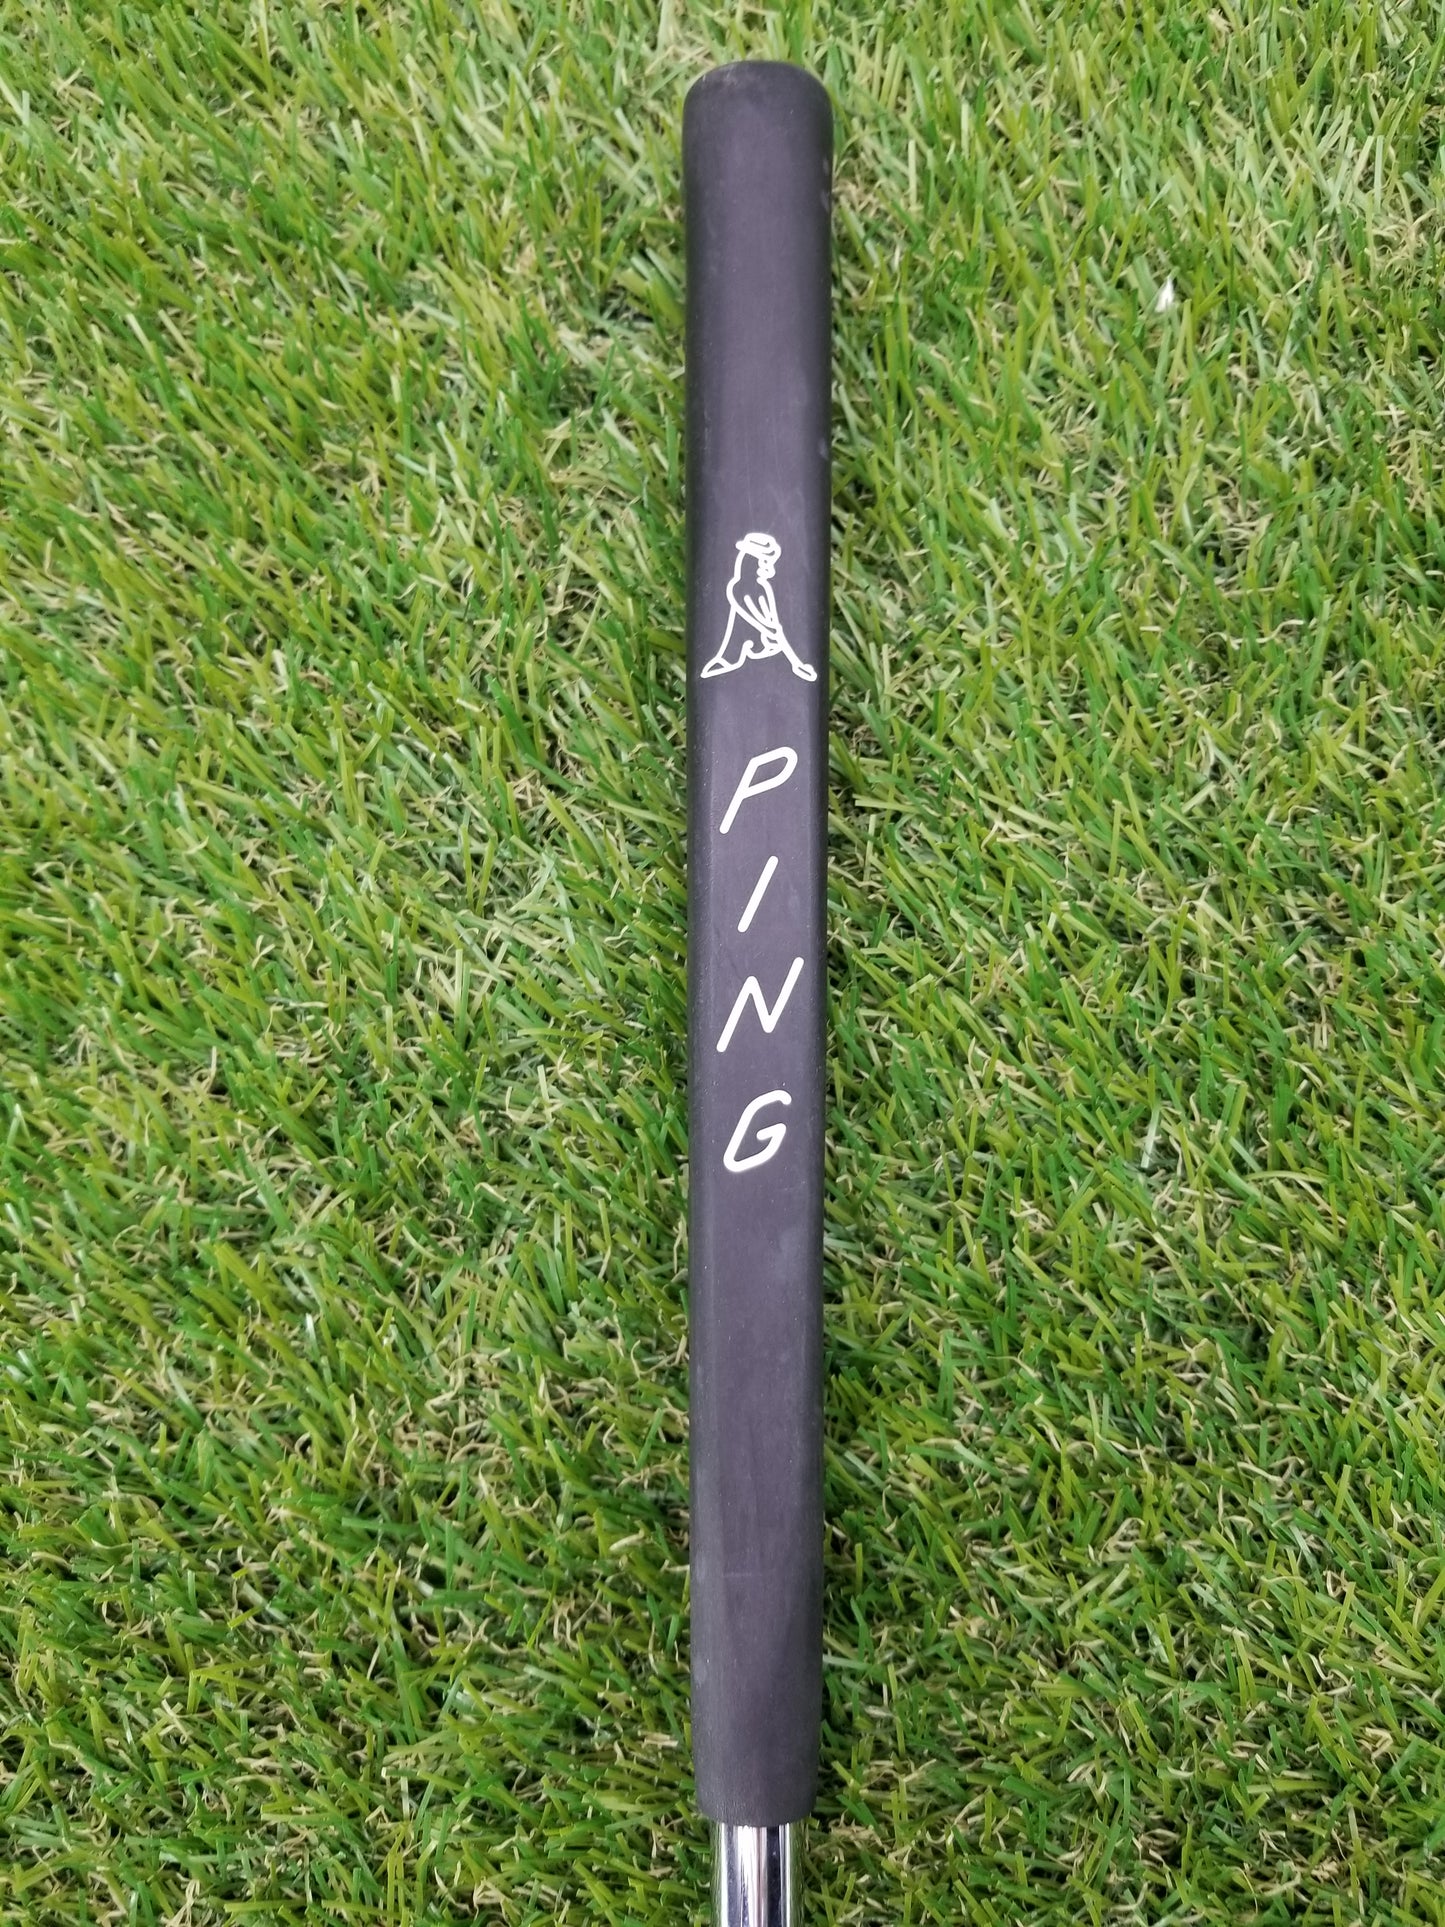 REFINISHED PING ANSER 2 PUTTER 34" DEMO